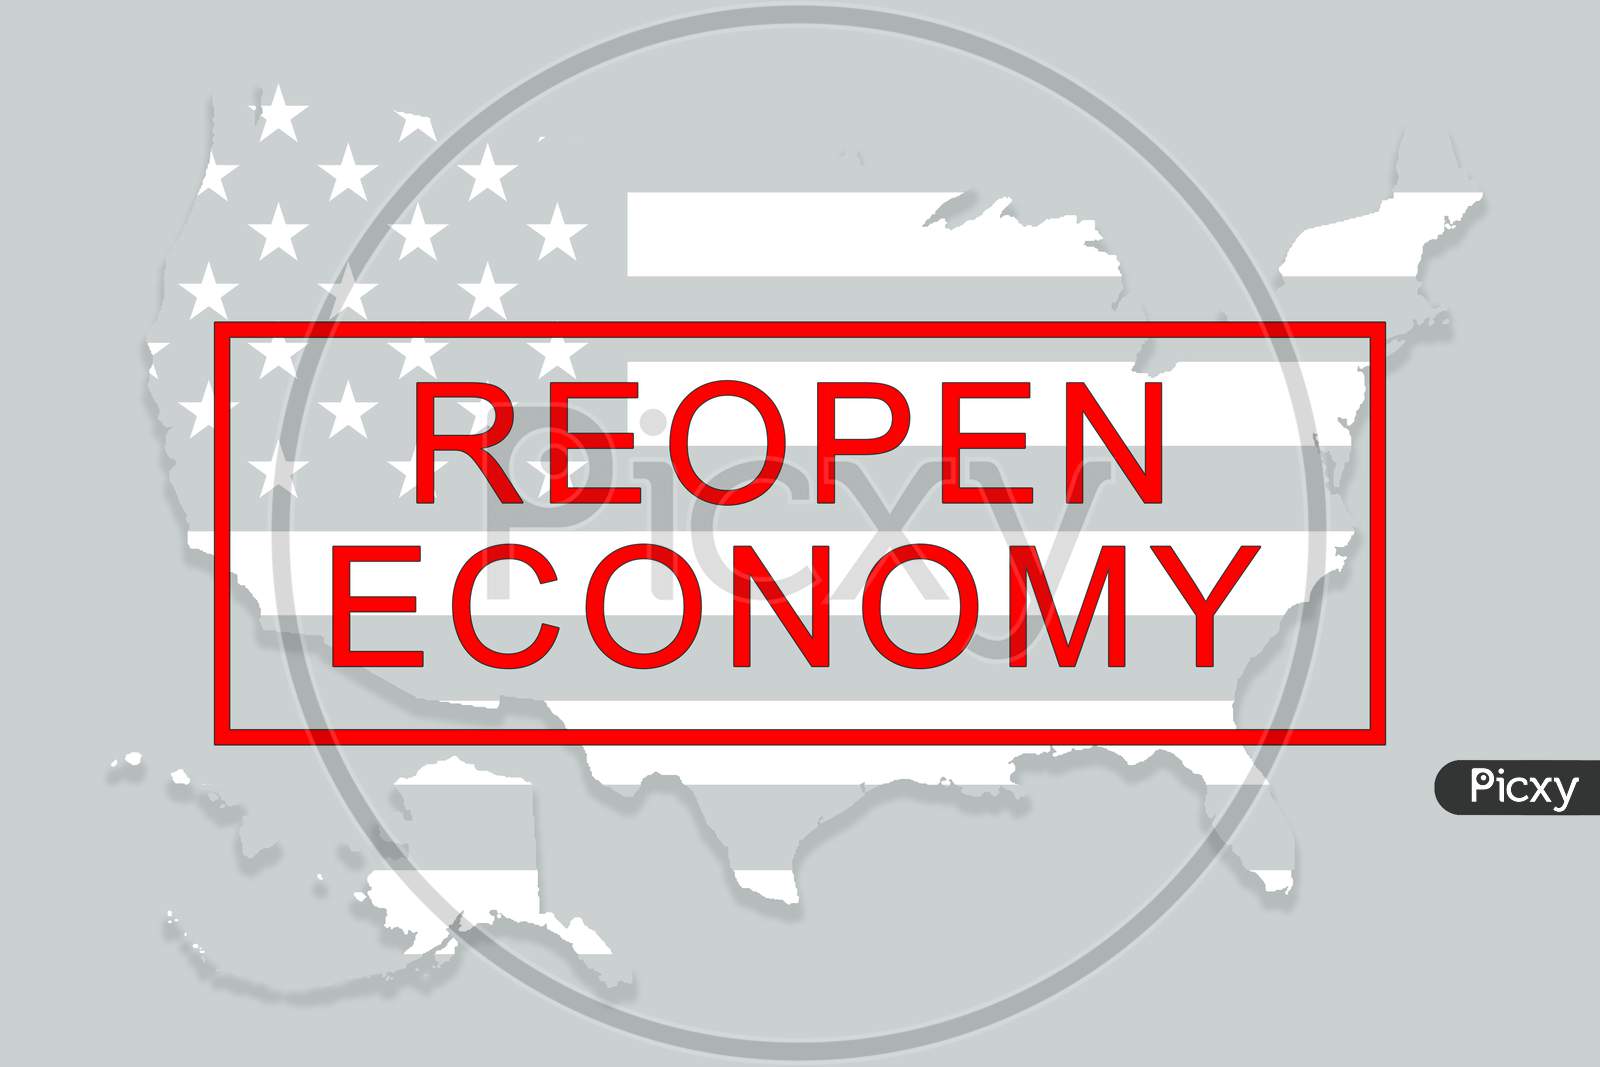 Concept Of Opening Us Economy, Reopen United States Or American Economic Activity - Back To Work After The Business Lockdown Due To Covid-19 Or Coronavirus Pandemic.